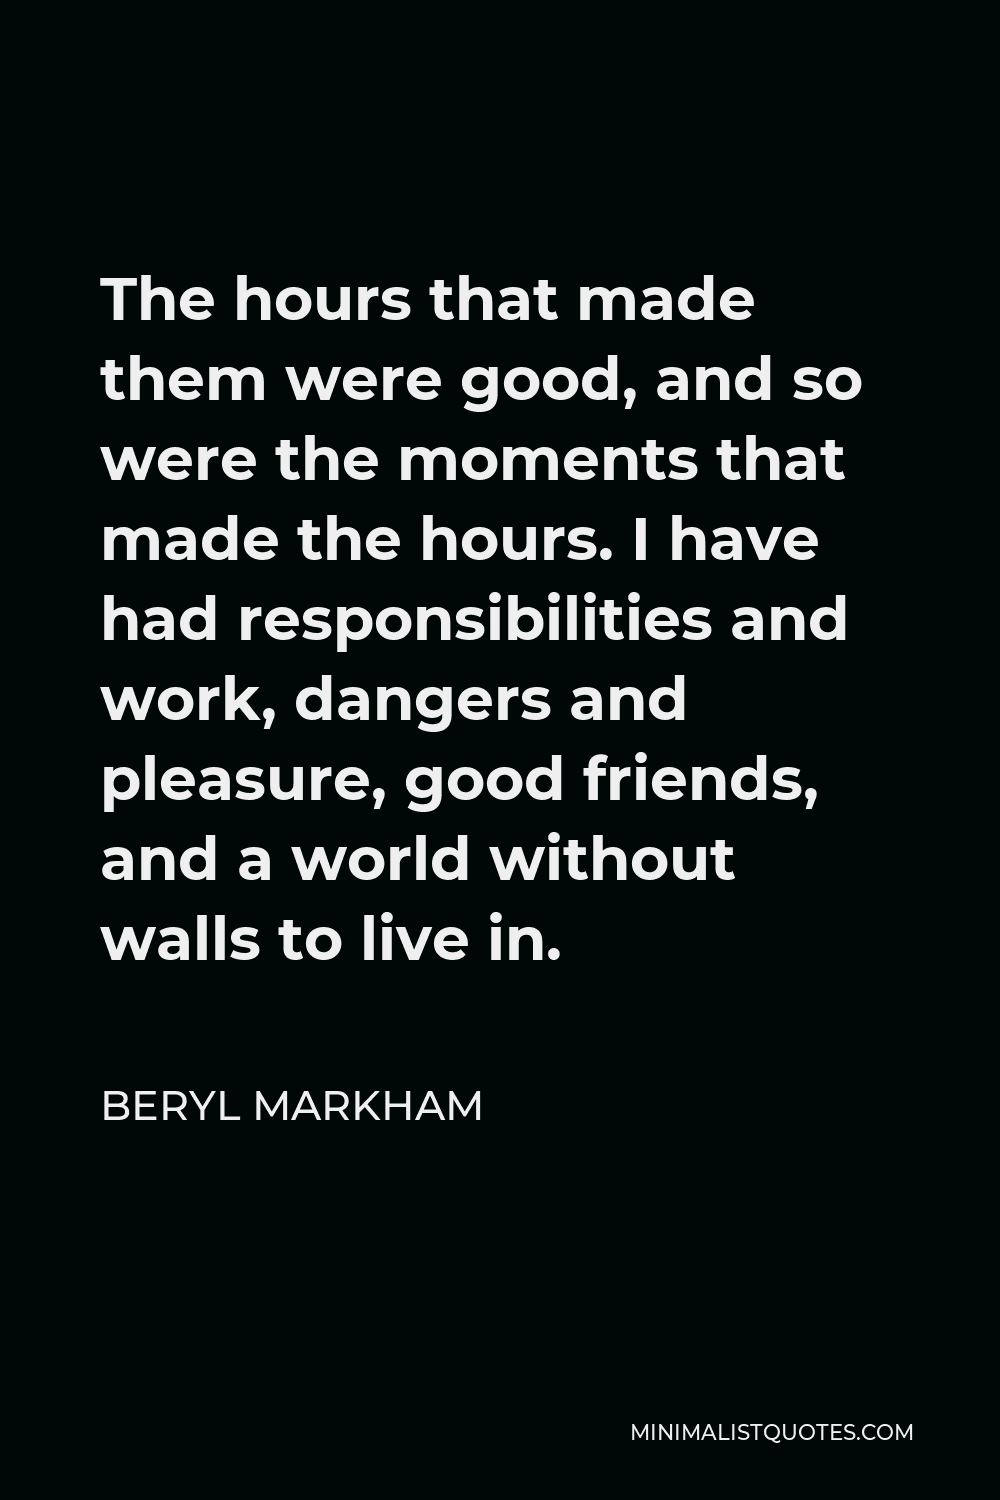 Beryl Markham Quote - The hours that made them were good, and so were the moments that made the hours. I have had responsibilities and work, dangers and pleasure, good friends, and a world without walls to live in.